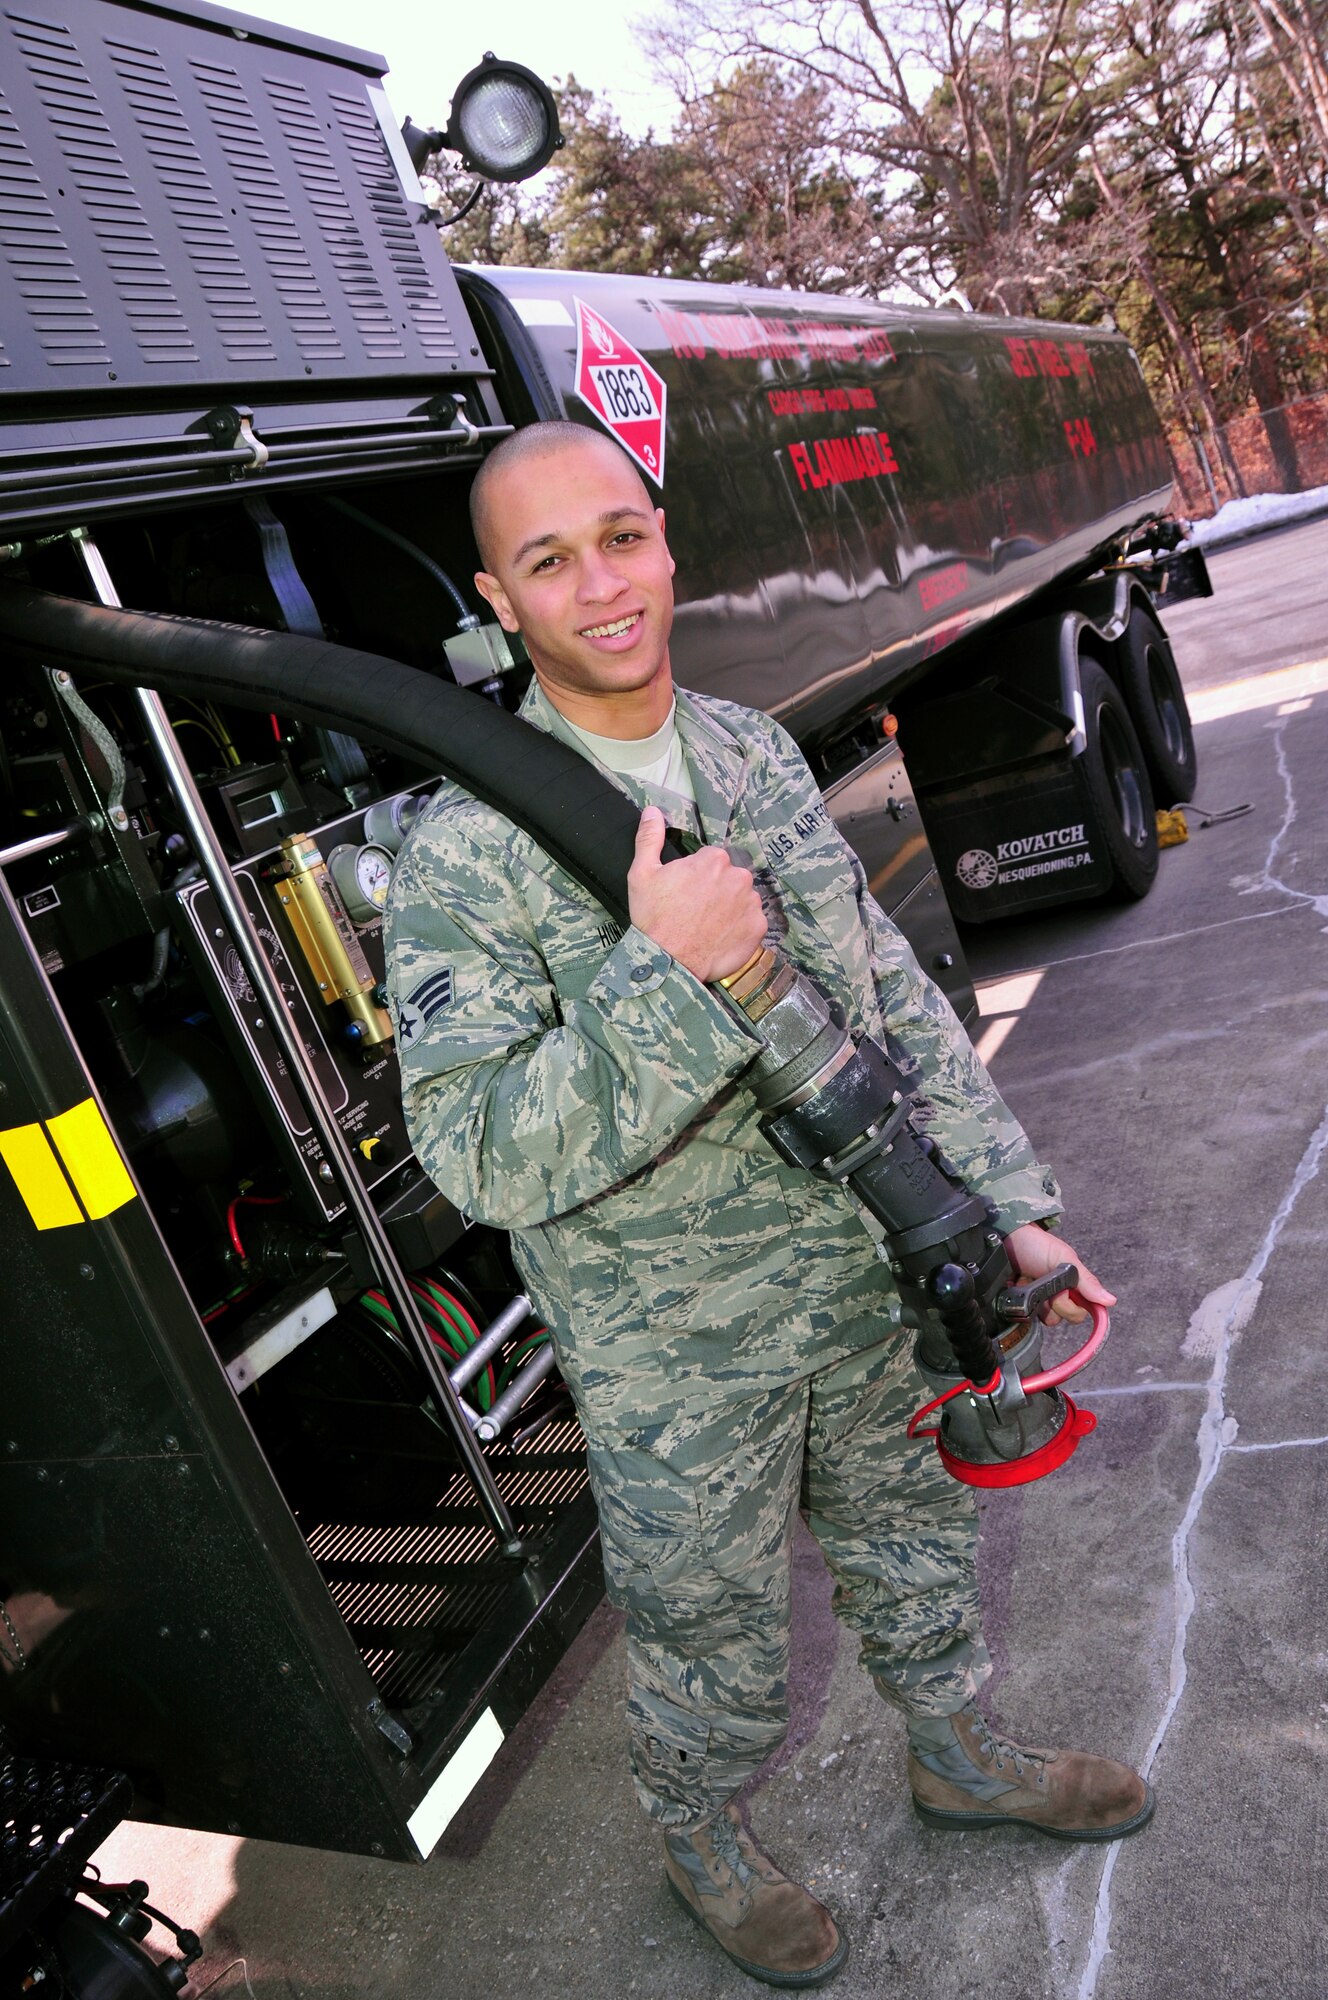 U.S. Air Force Senior Airman Alexander Hunter III of the 177th Fighter Wing Logistics Readiness Squadron earned the honor of joining the Elite "Million Gallon Club", in addition to earning the titles of Pumper of the Month and "Run King" during his deployment to a non-disclosed Southwest Asia location.  Airman Hunter was assigned to the 379th Air Expeditionary Wing from November 2009 until January 2010 in support of Operation Enduring Freedom.  U.S. Air Force photo by Staff Sgt. Matthew Hecht, 177th FW/PA   